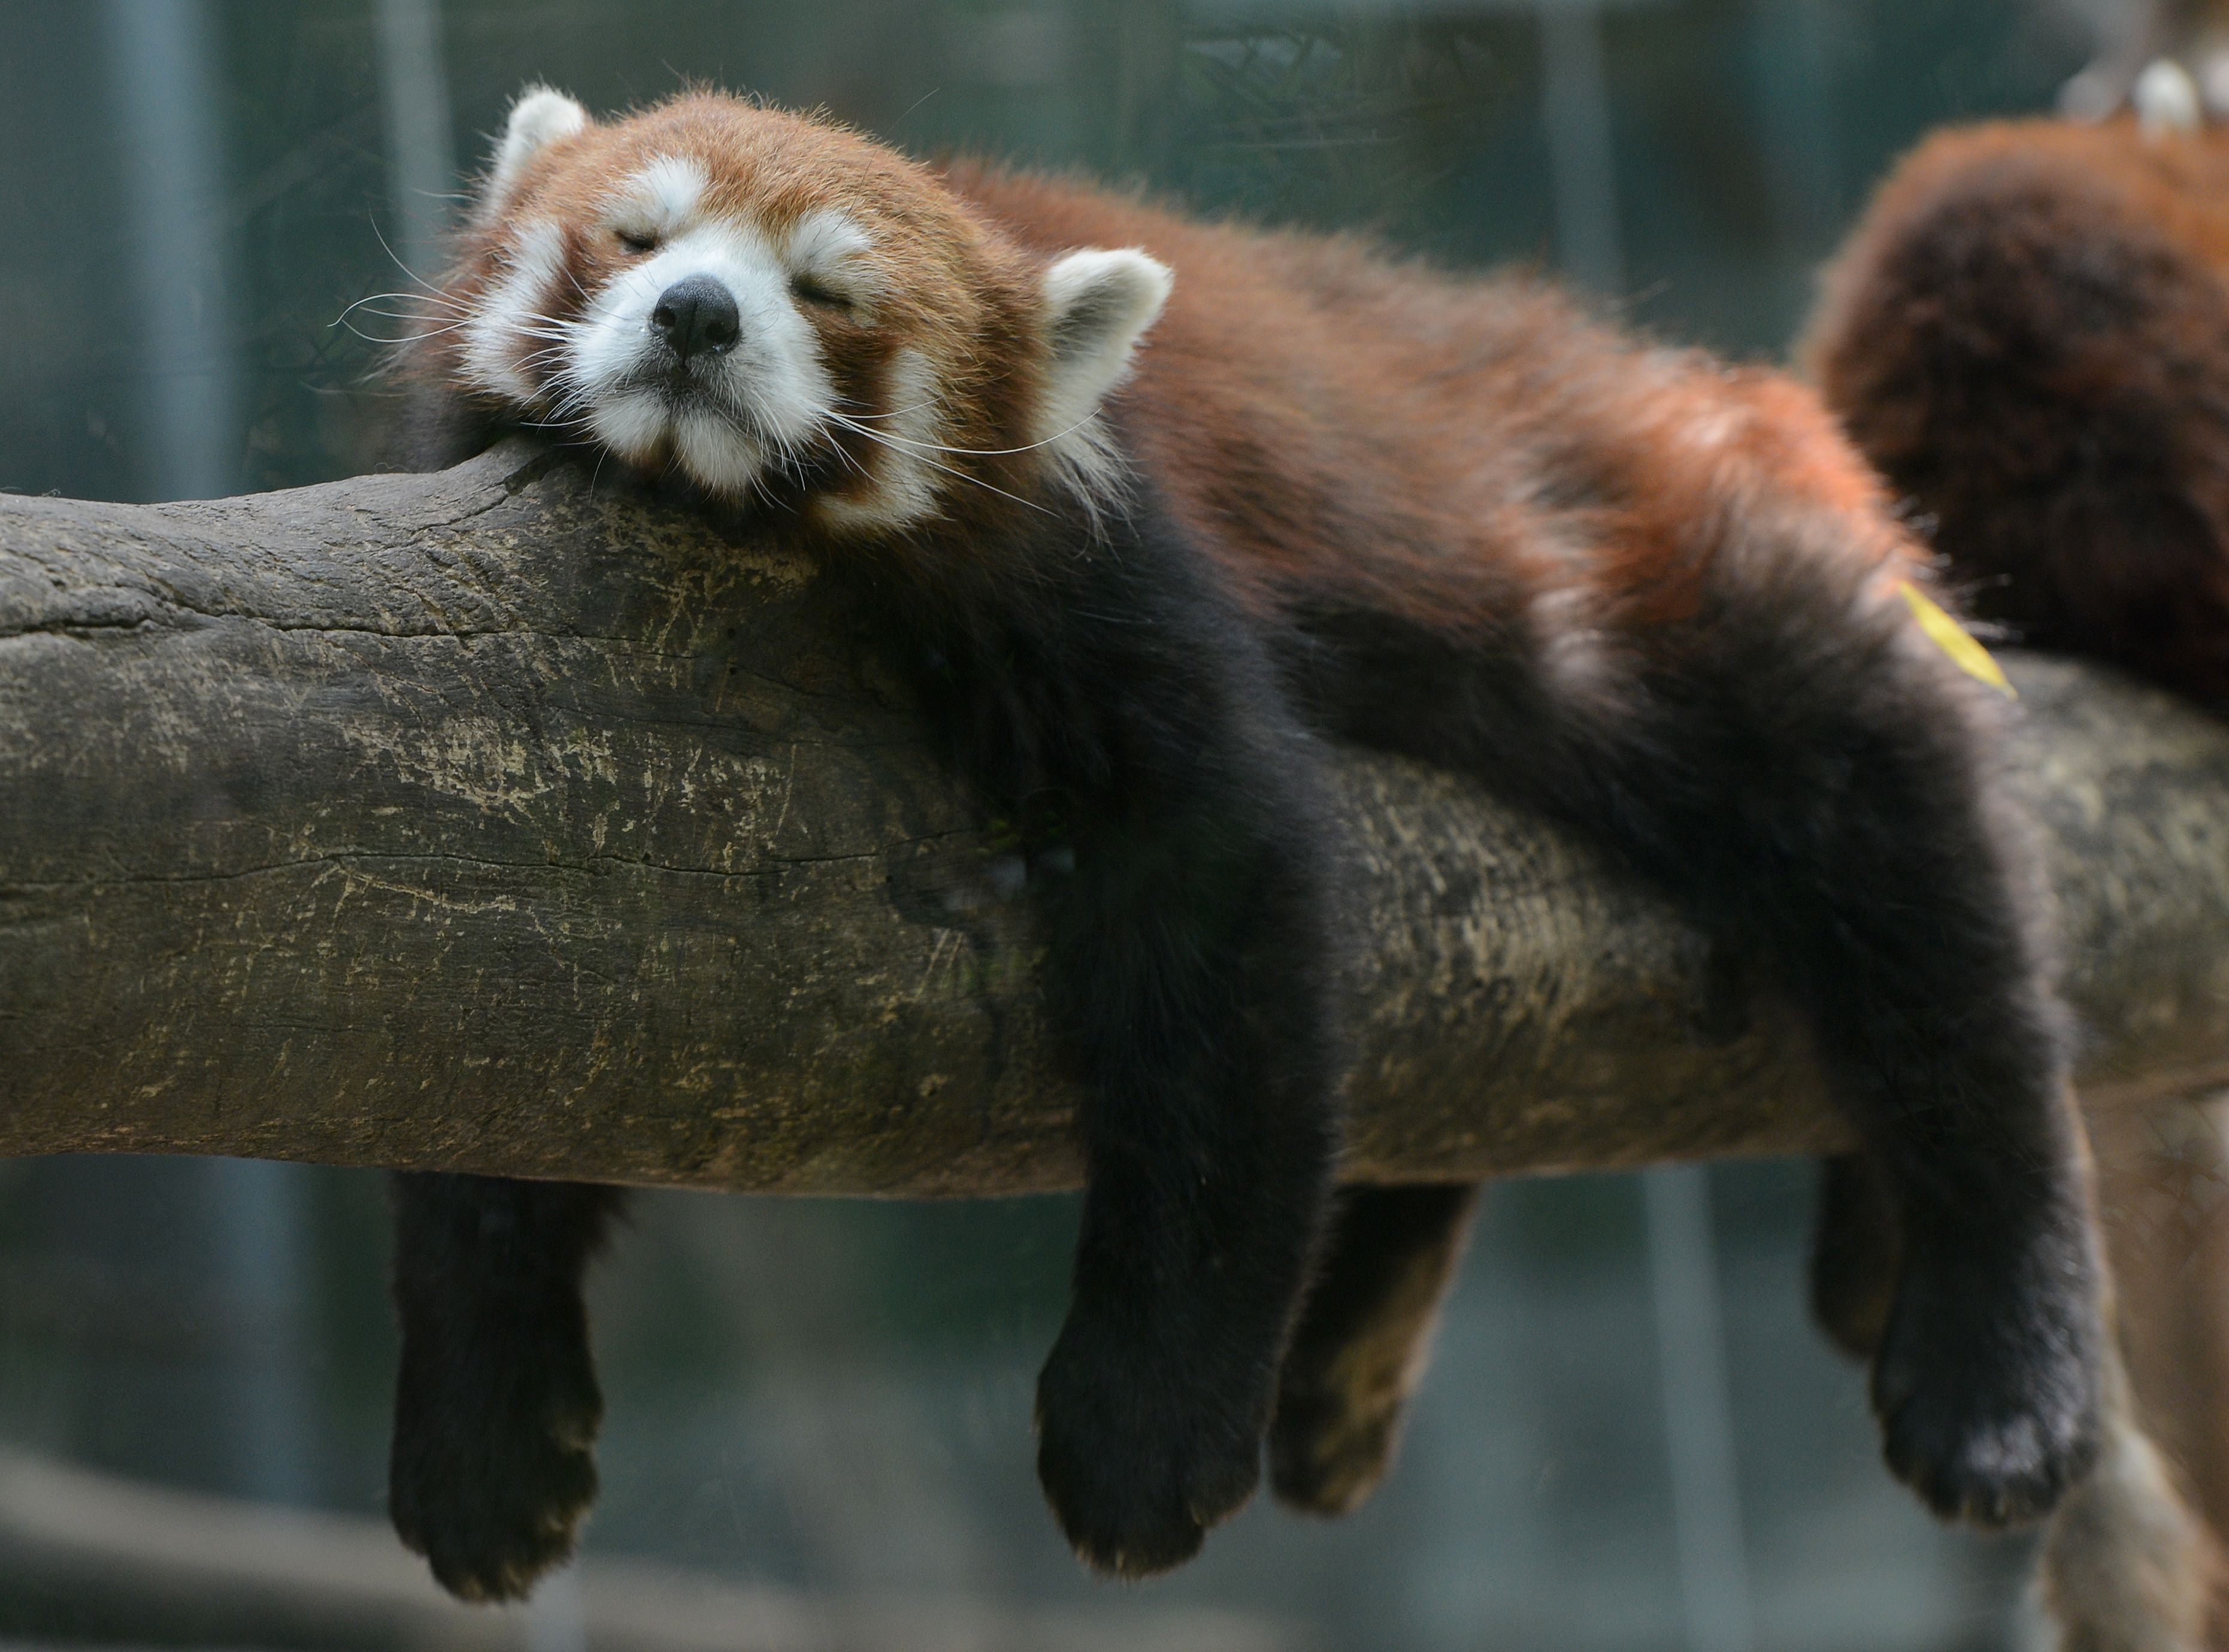 But for red pandas taken to Laos from China, things are less black and white